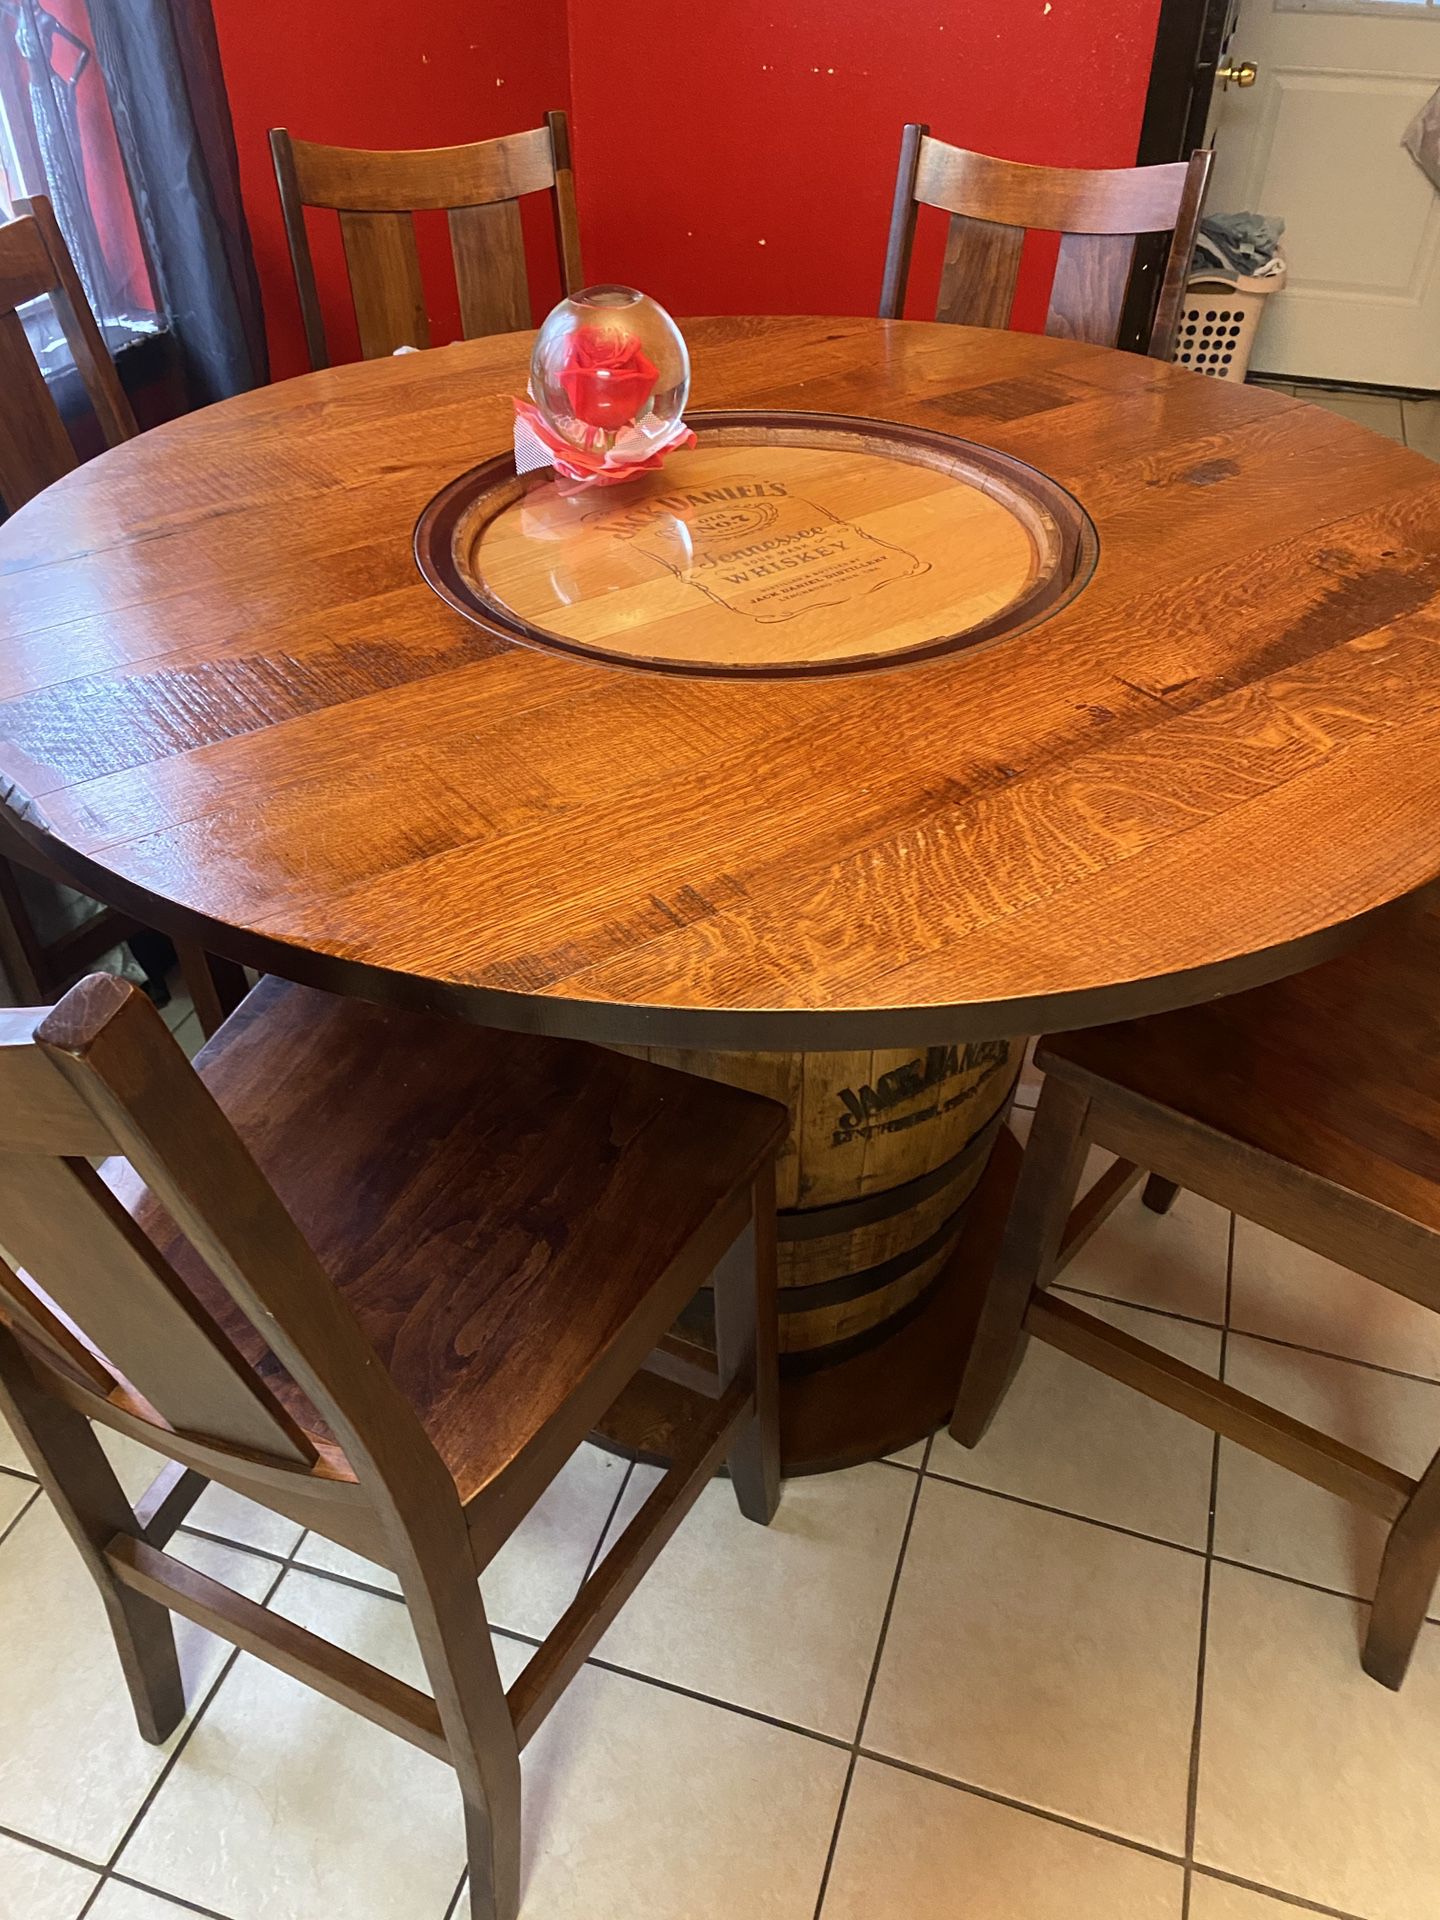 Jack Daniels Whisky Barrel   Table  If Interested Call (contact info removed)